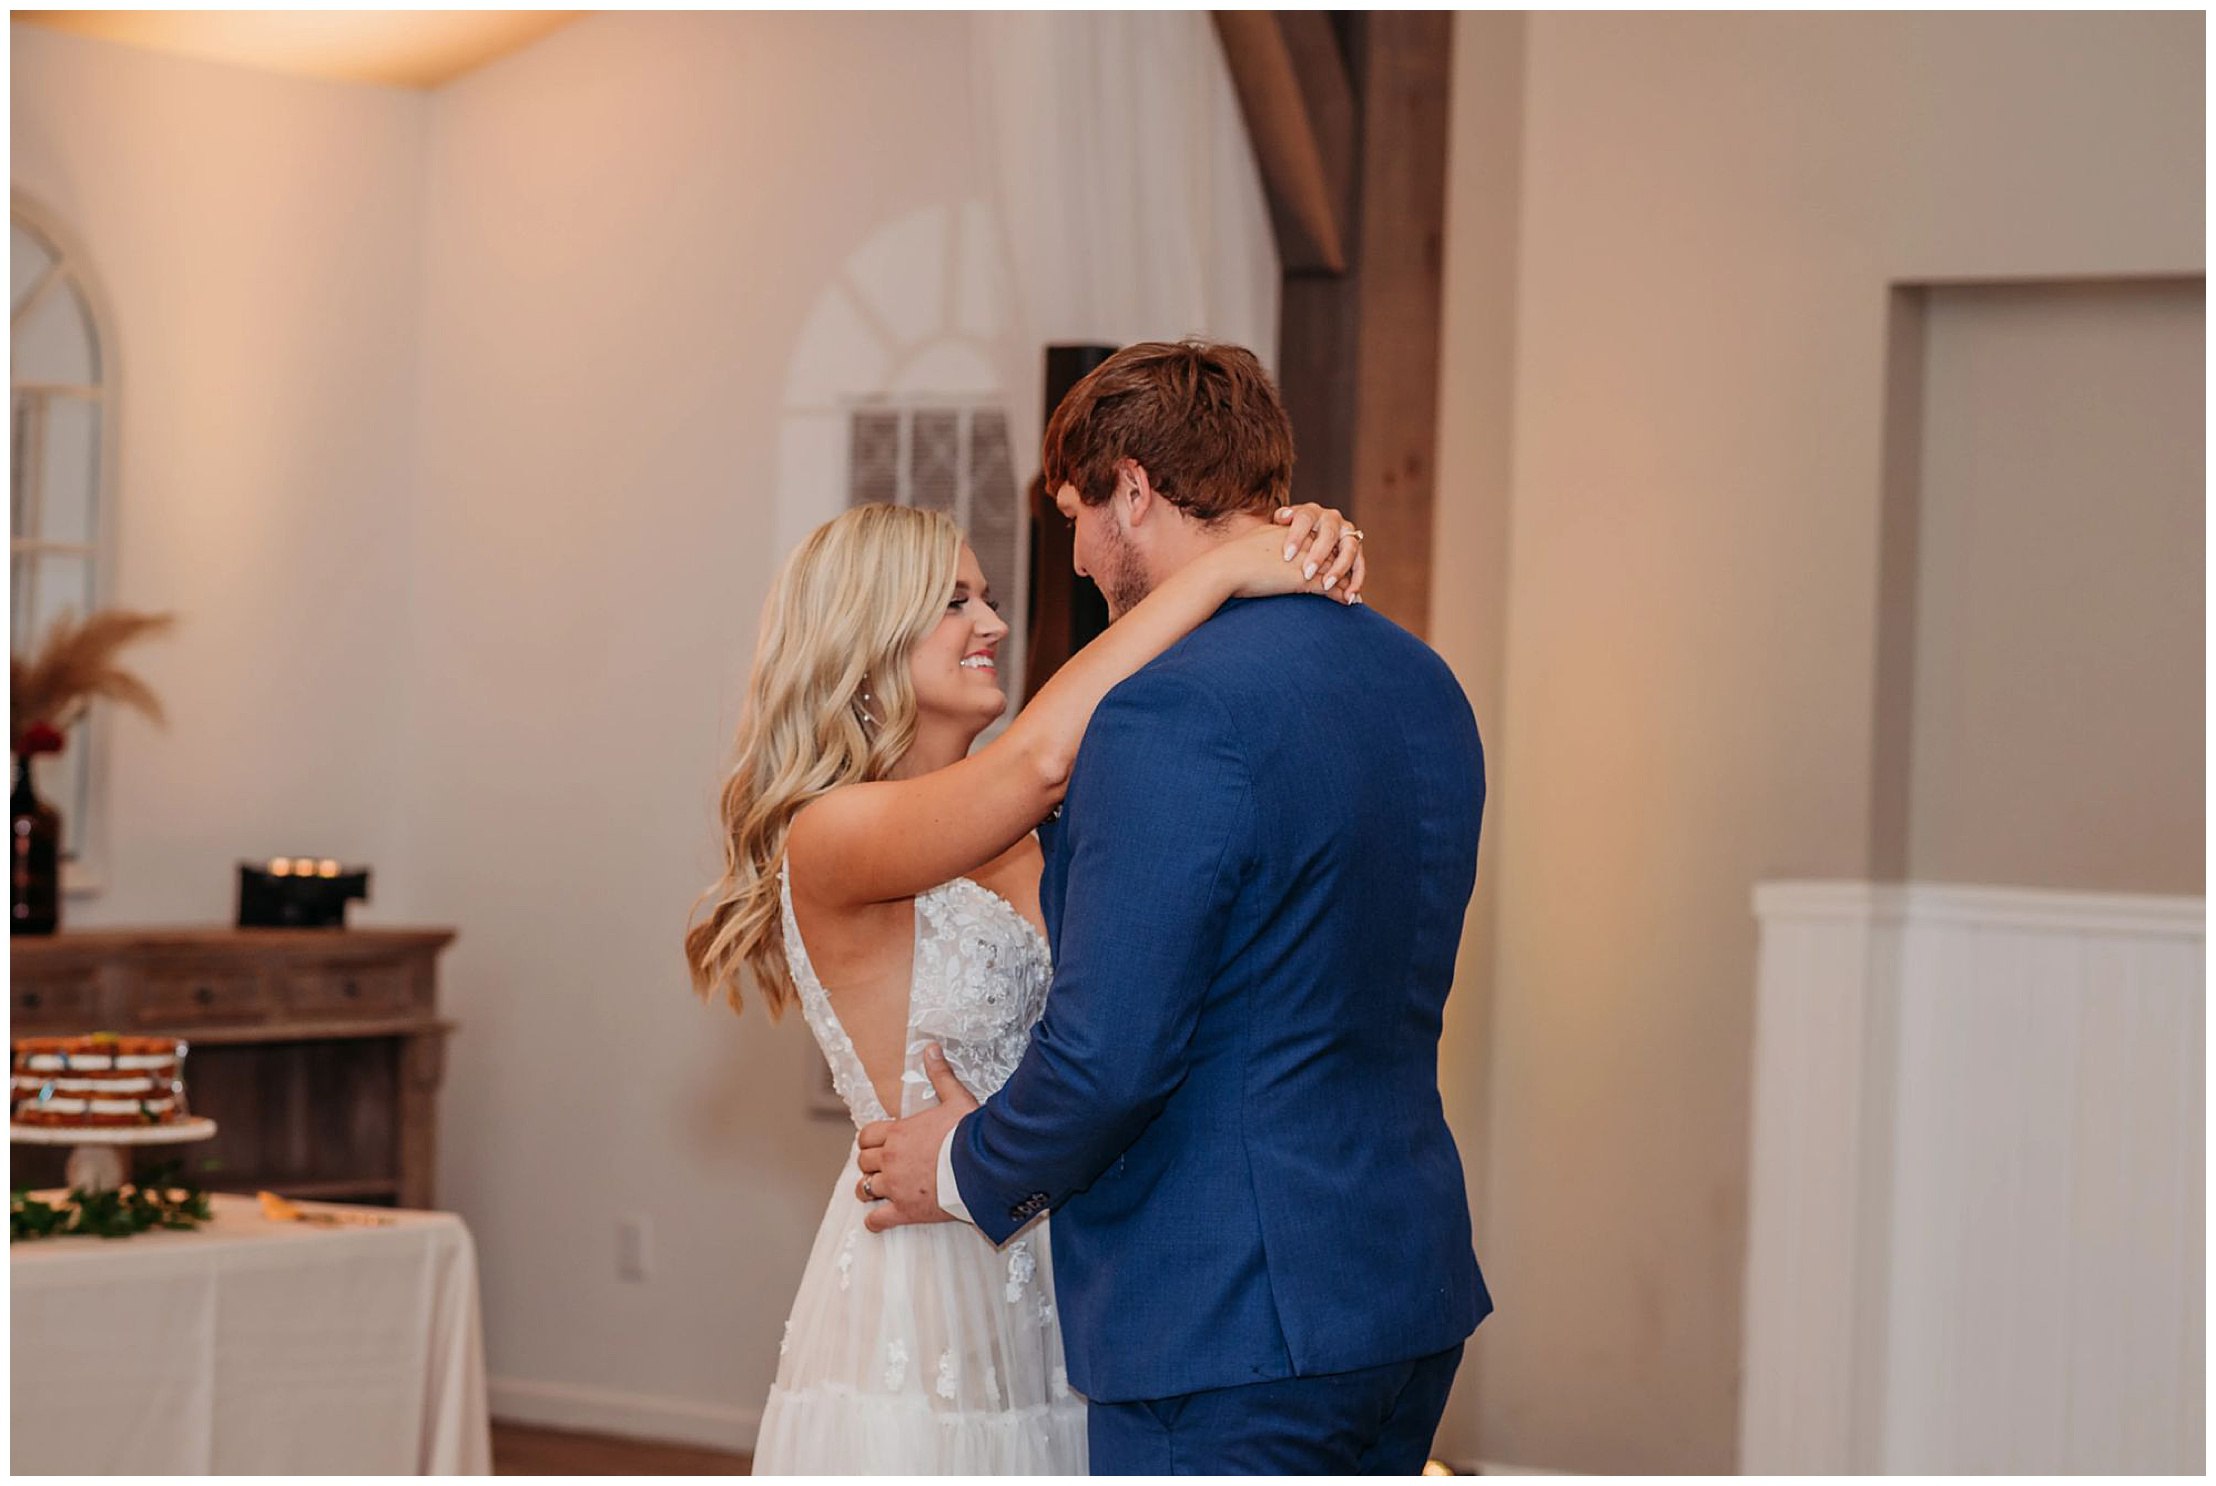 bride and groom slow dancing and smiling indoors with white walls